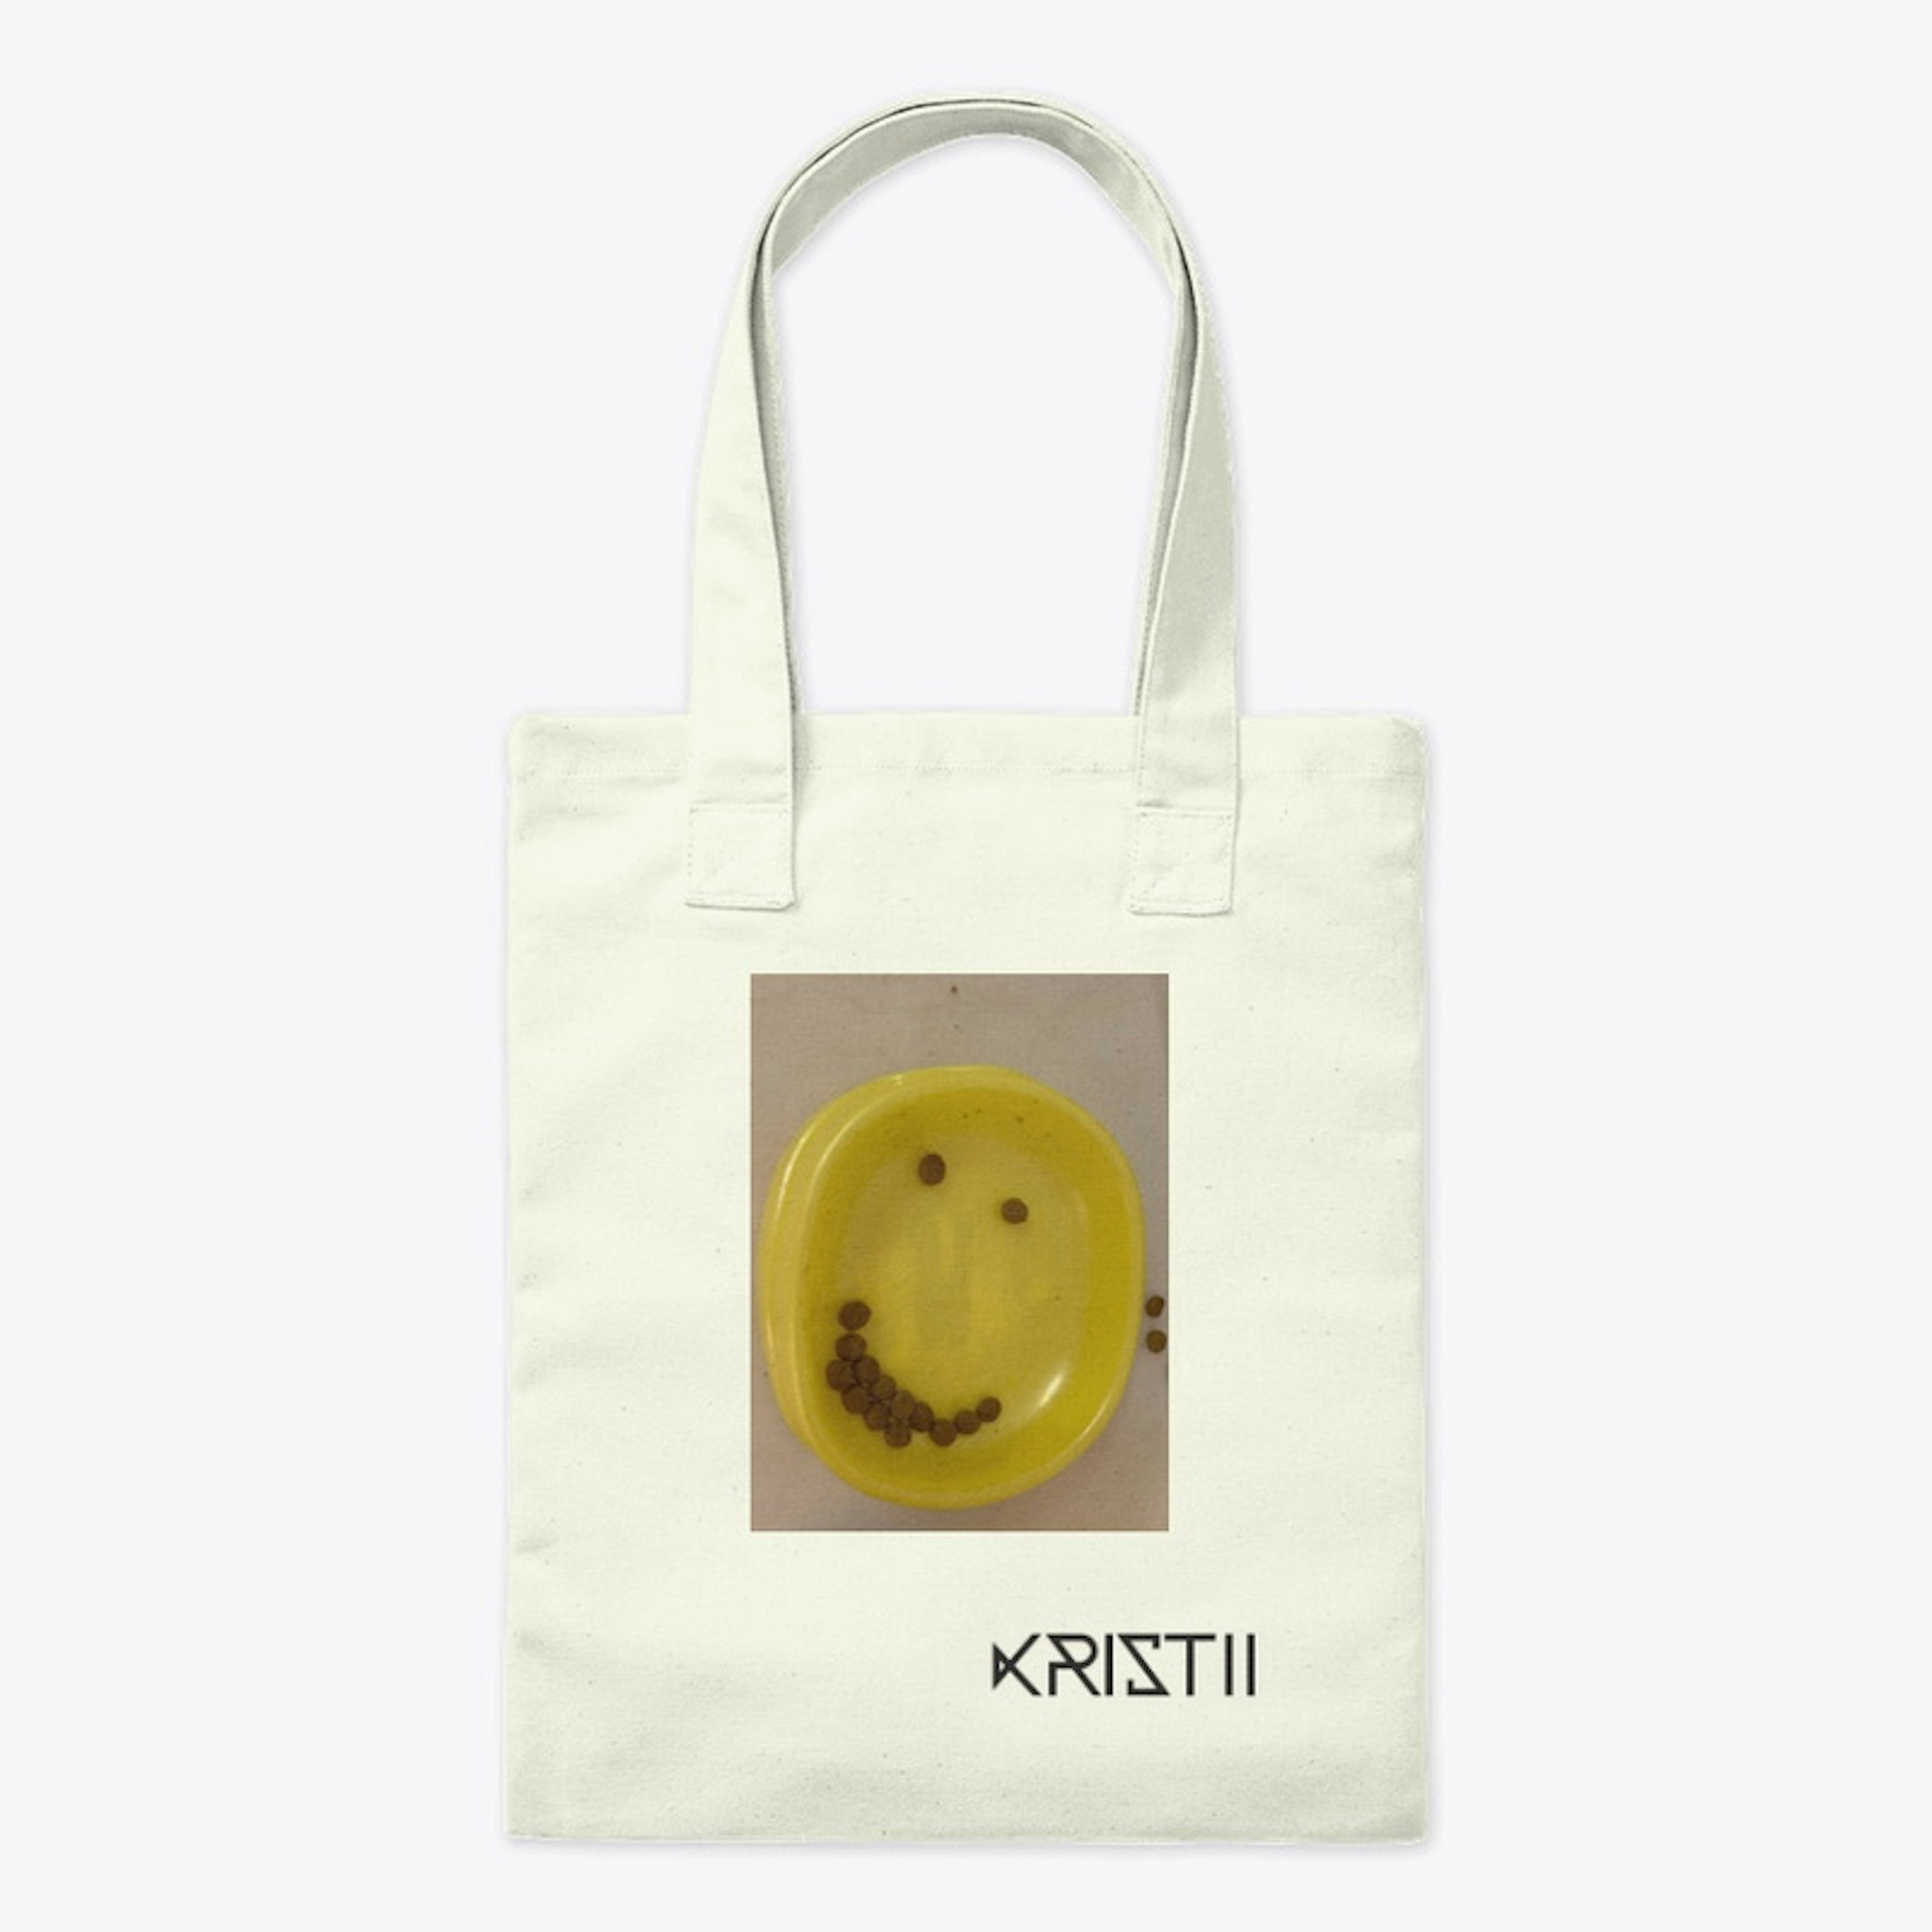 KRISTII Spring Collection 2021 